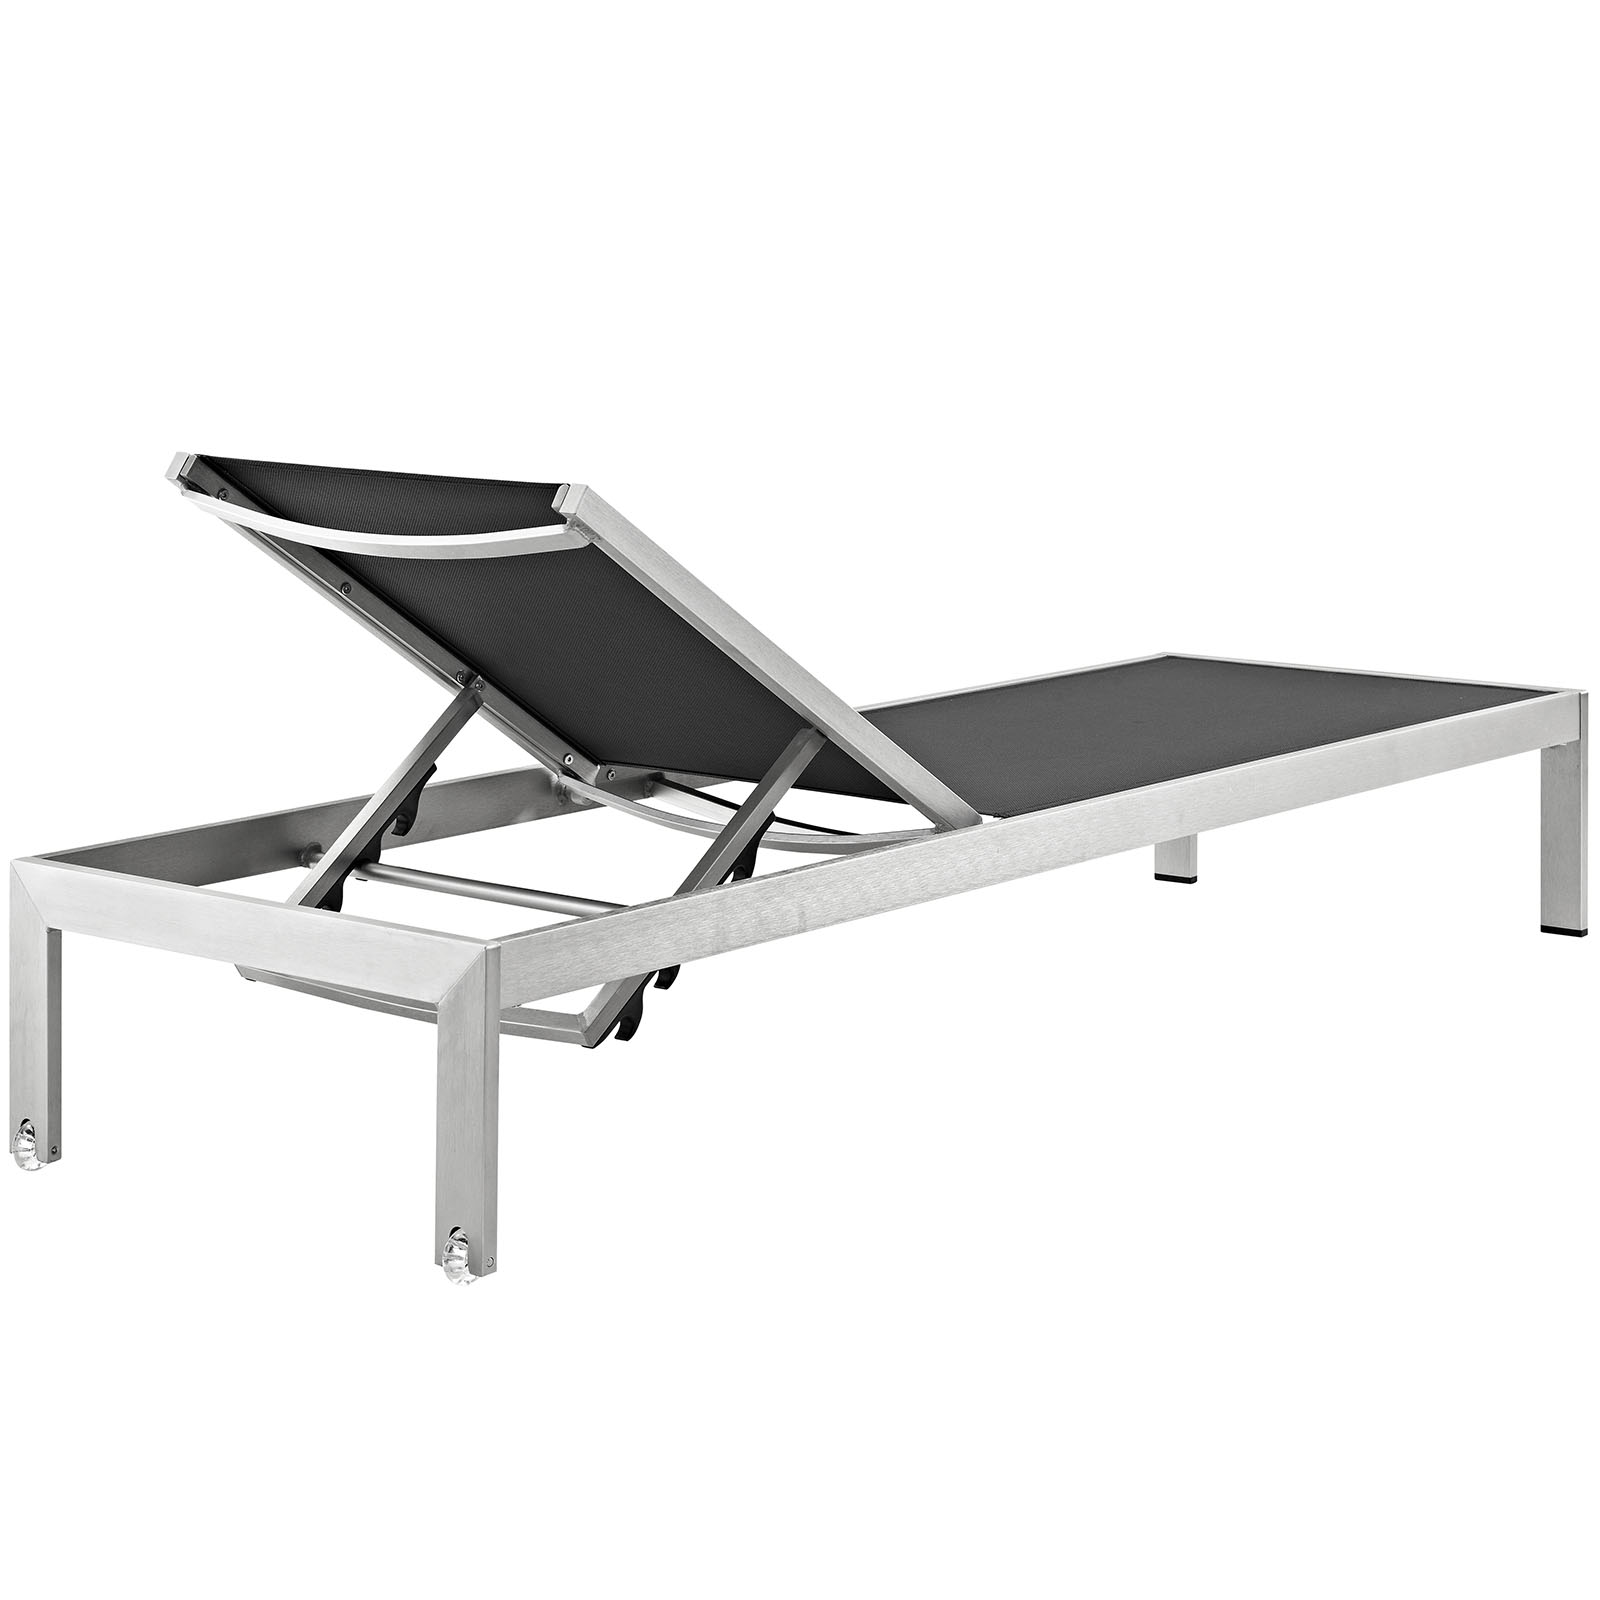 Modern Contemporary Urban Outdoor Patio Balcony Garden Furniture Lounge Chair Chaise and Side Table Set, Aluminum Metal Steel, Black - image 5 of 7